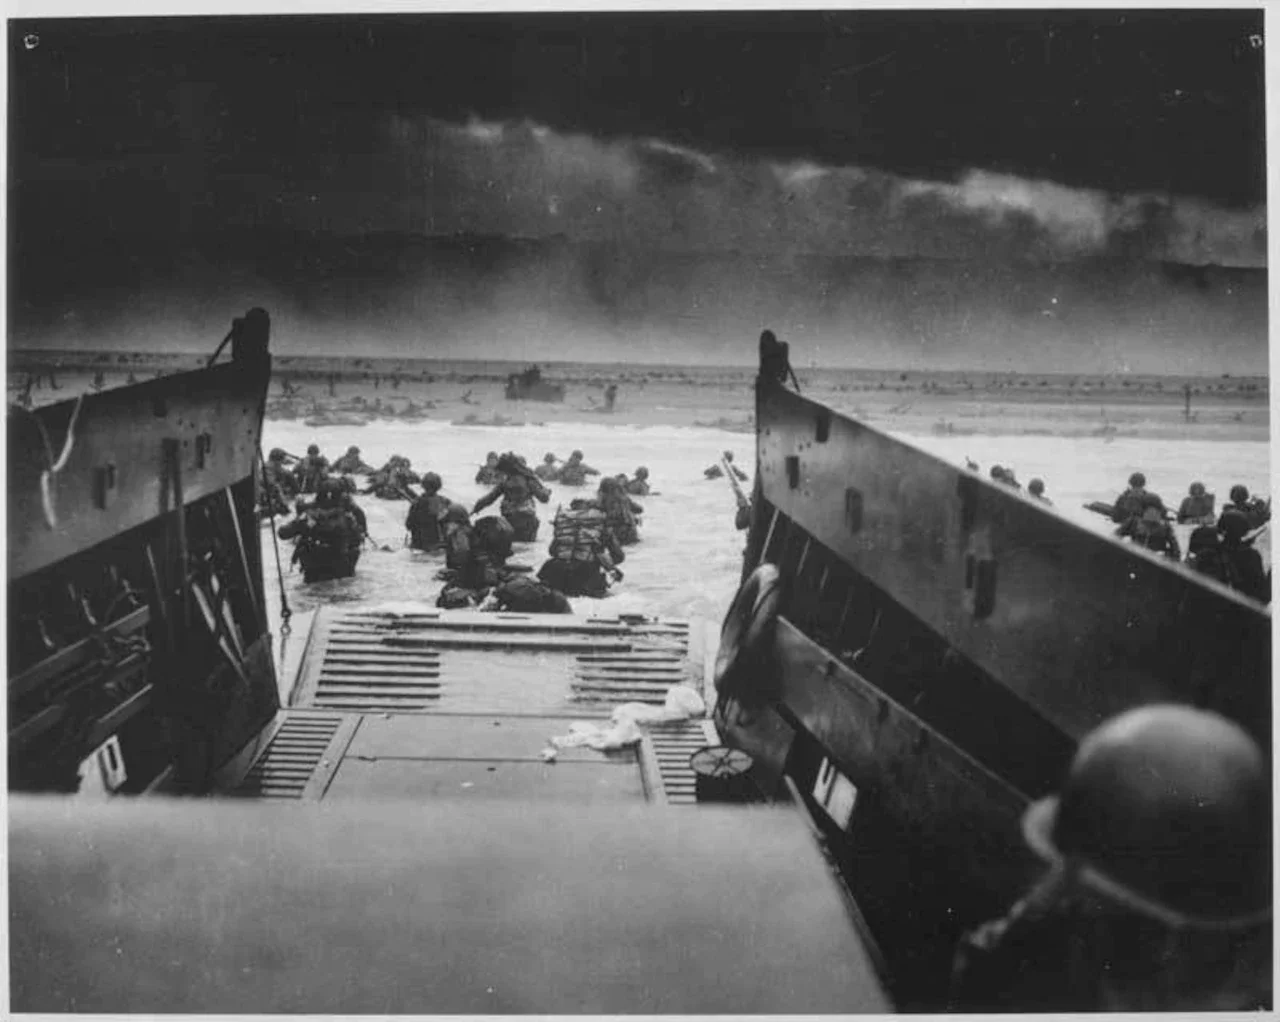 An empty boat looks over water filled with soldiers trudging to shore.